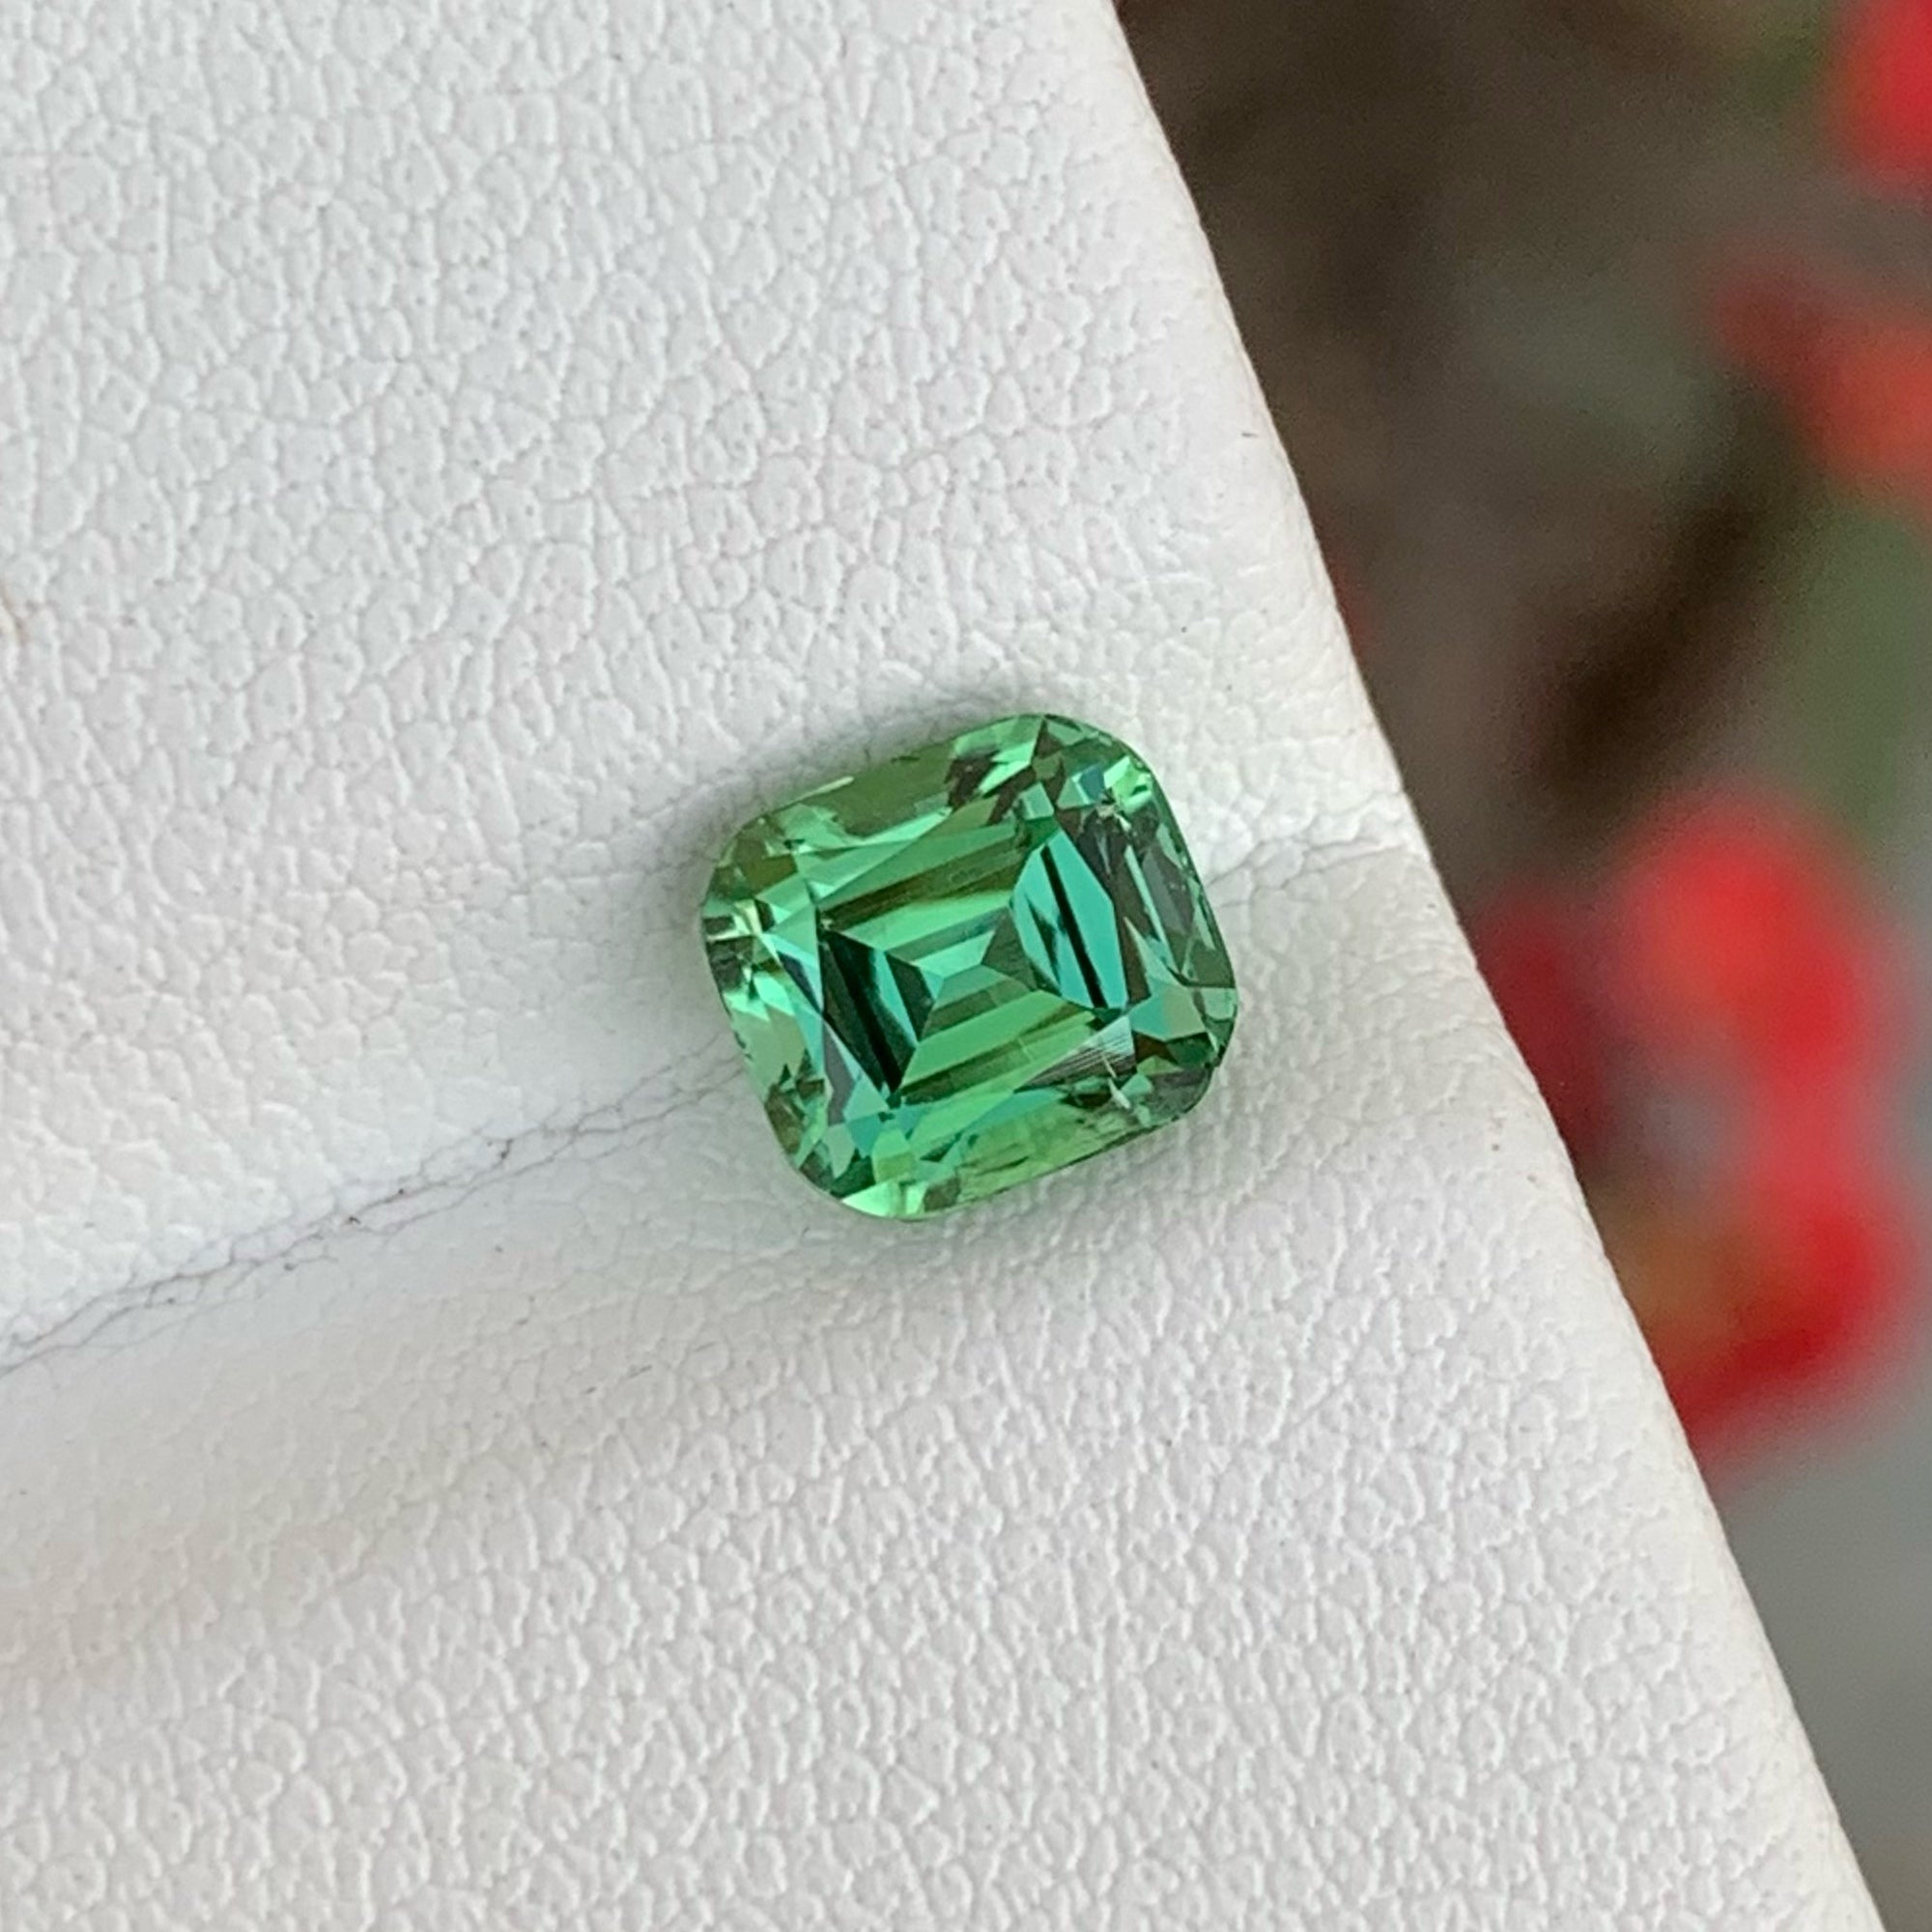 Exceptional Mint Green Tourmaline Stone